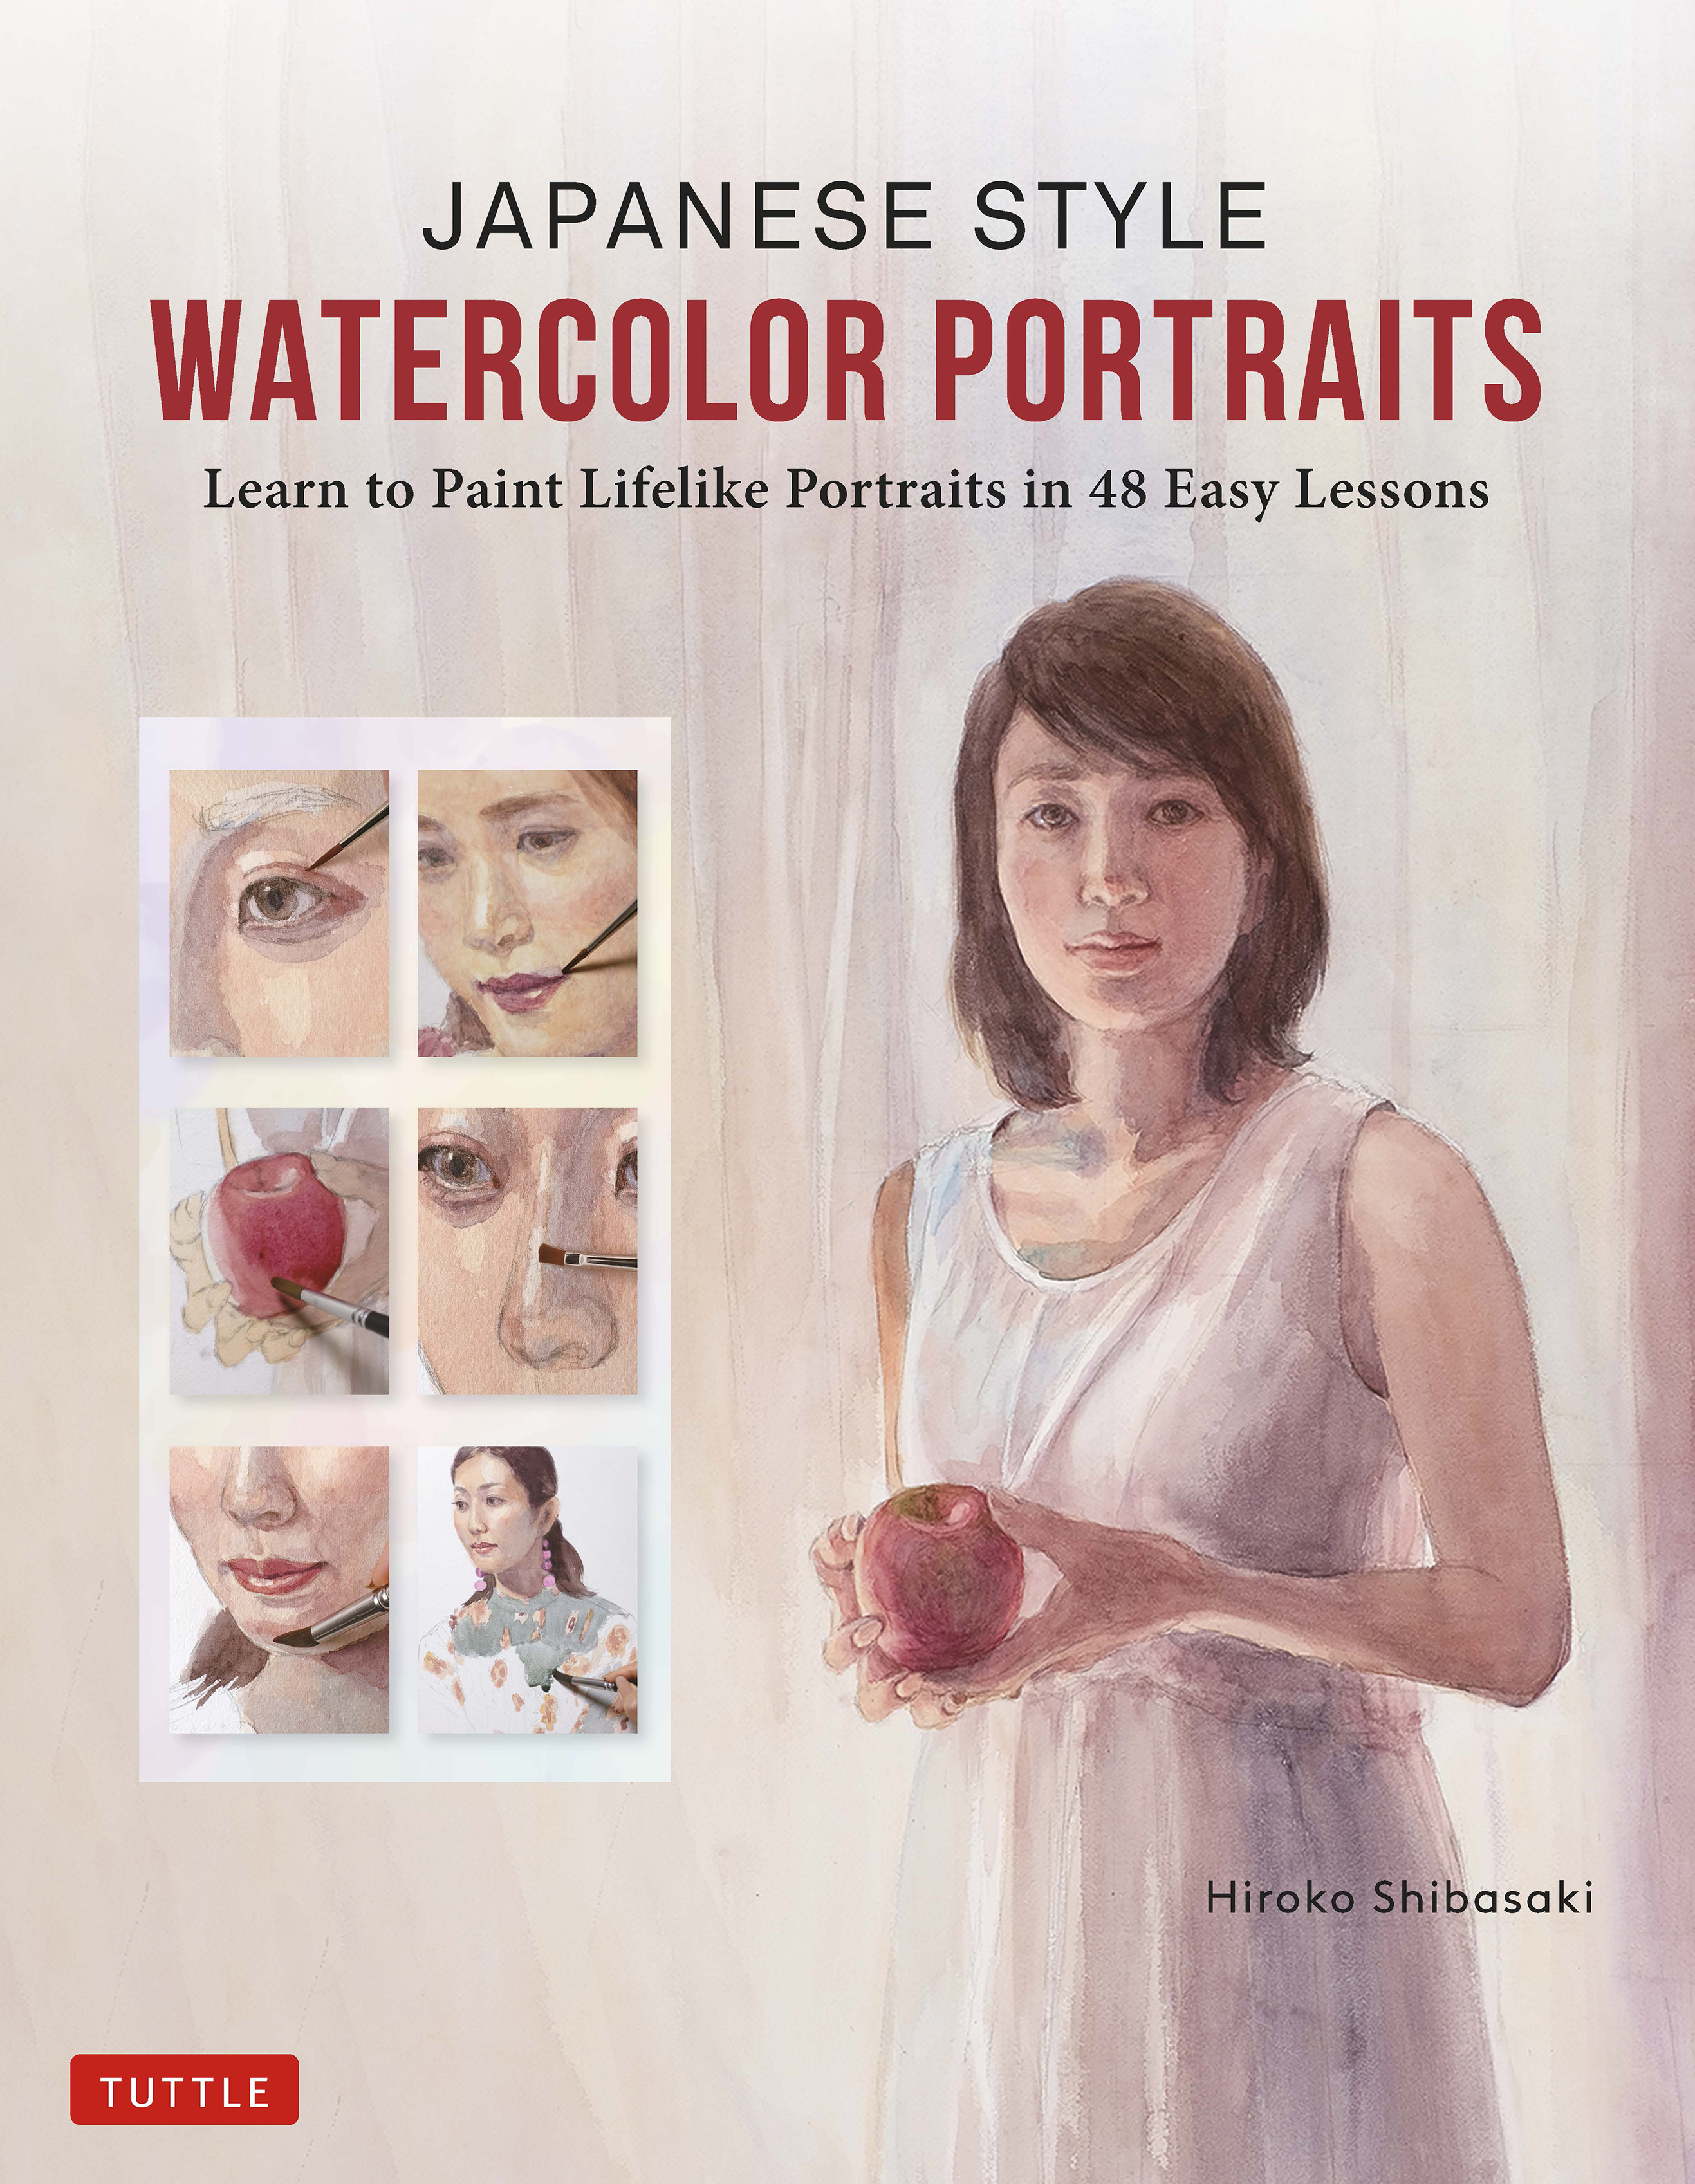 Watercolor for the Absolute Beginner by Mark Willenbrink, Mary